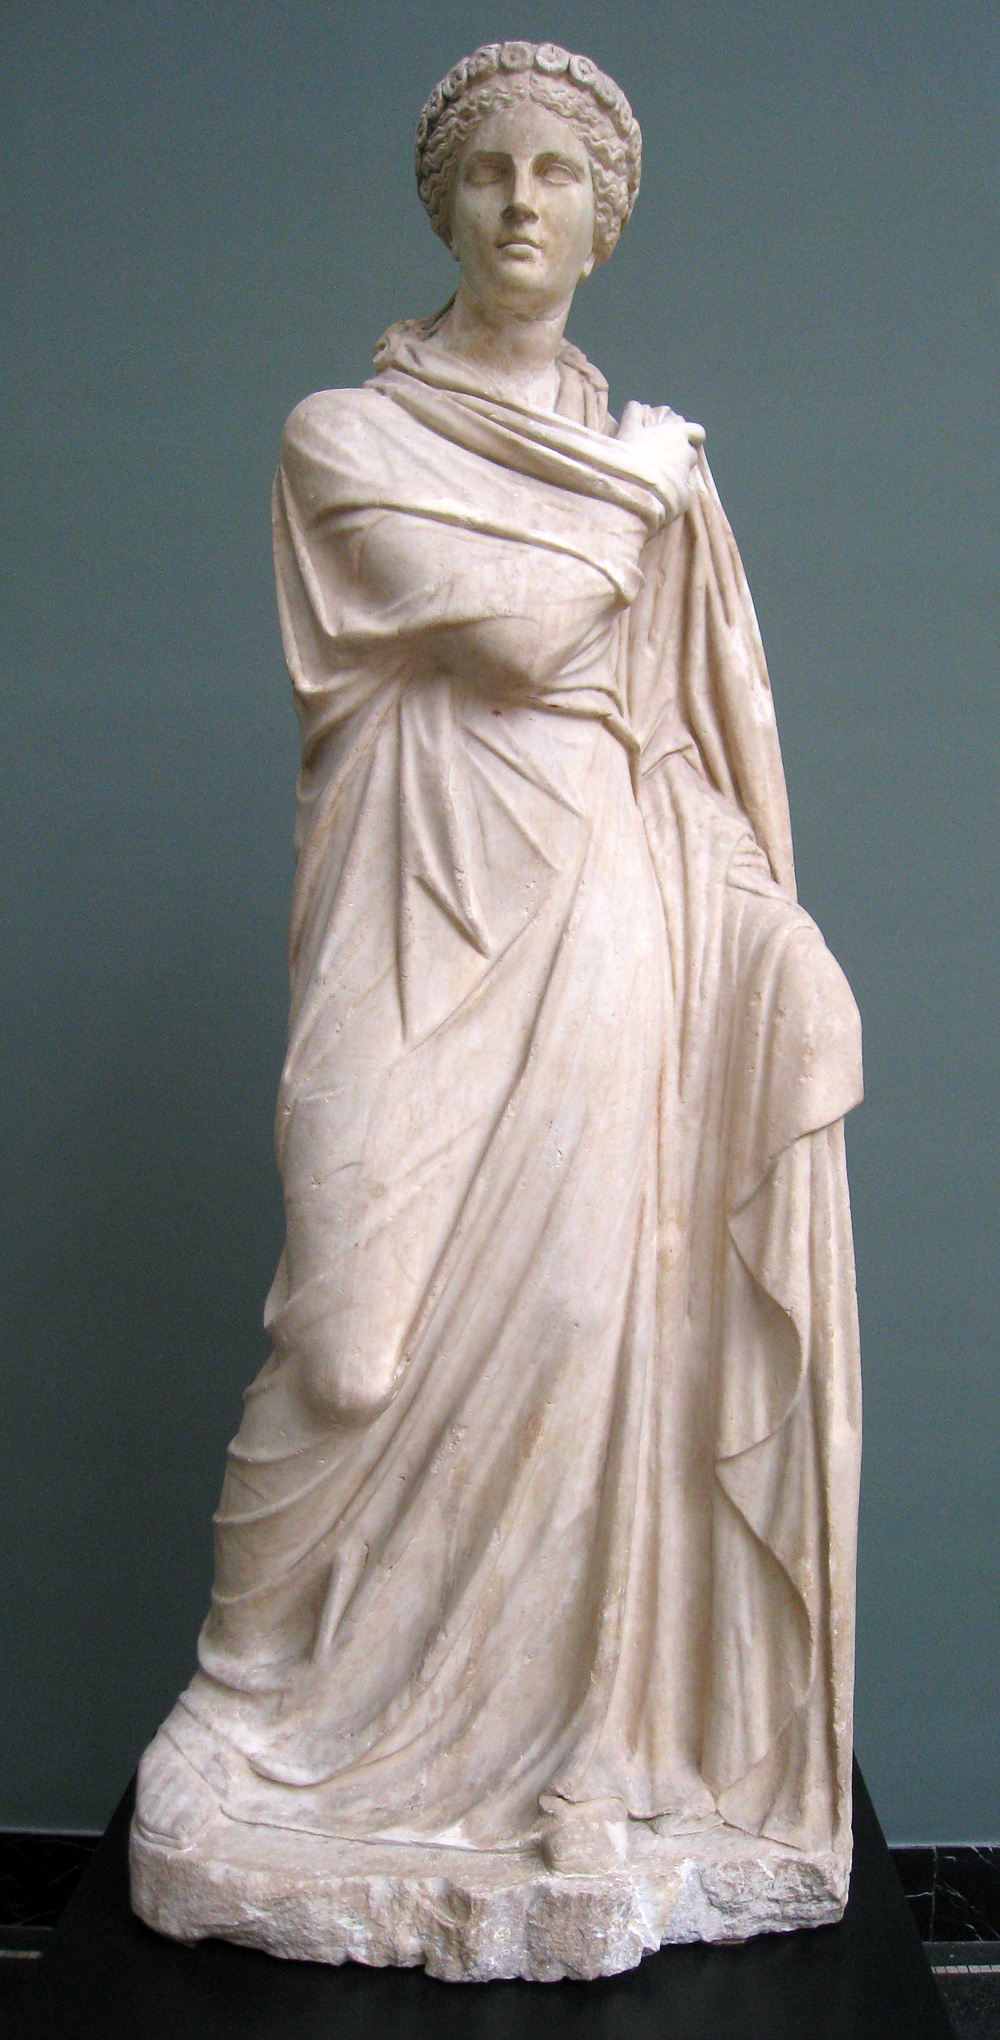 Roman statue of Polyhymnia, 2nd century AD, depicting her in the act of dancing.